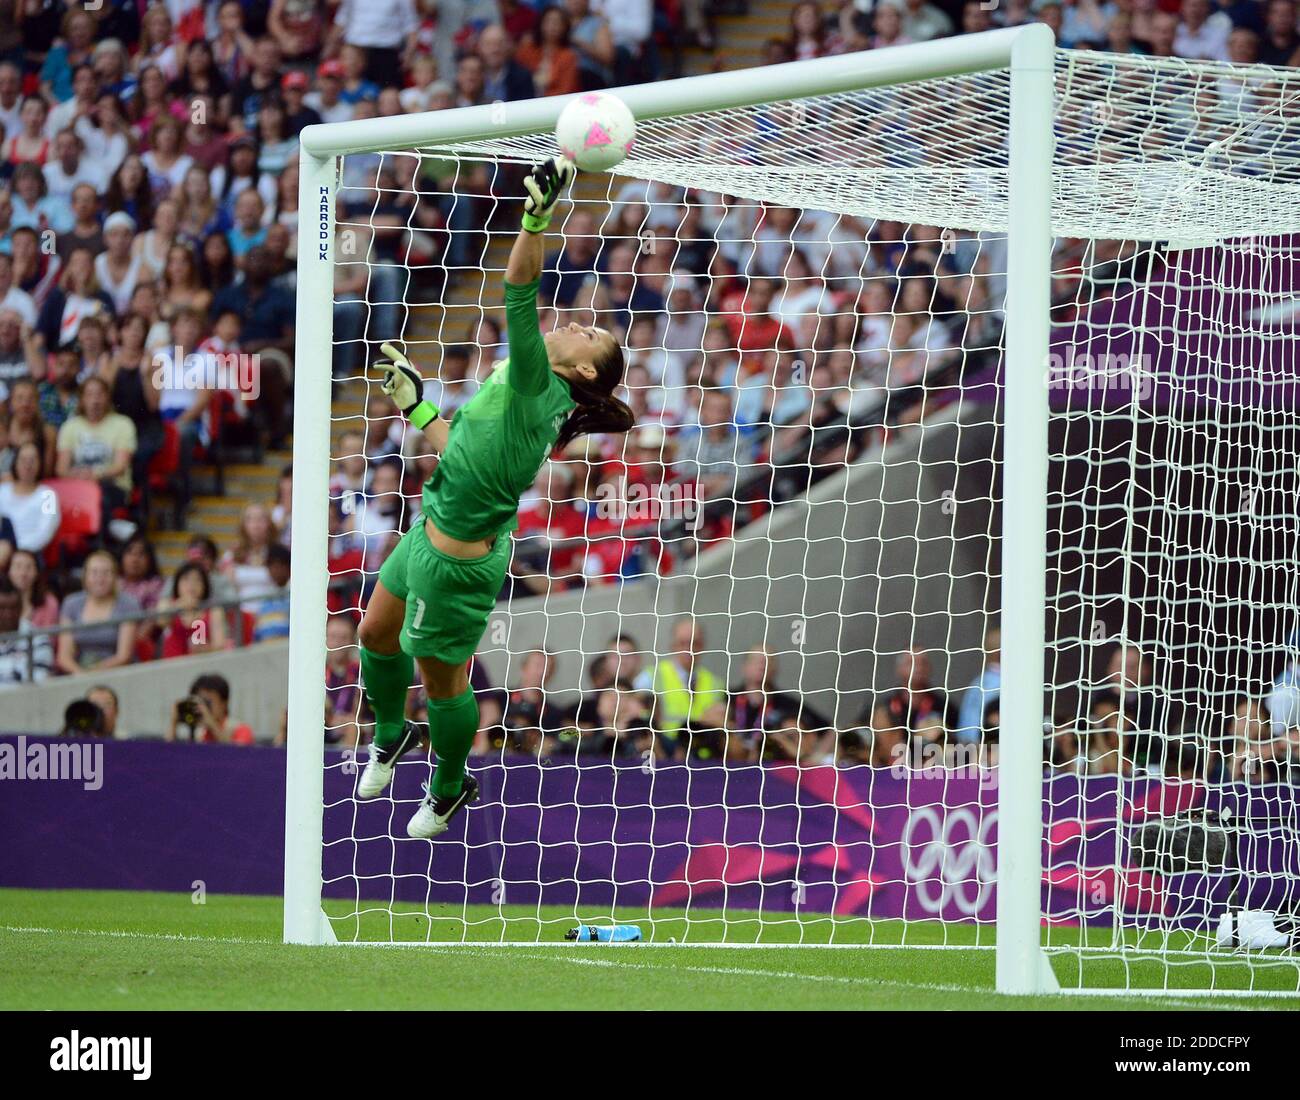 NO FILM, NO VIDEO, NO TV, NO DOCUMENTARY - USA goalkeeper Hope Solo makes a save during the first half against Japan in the Olympics women's soccer gold medal match at Wembley Stadium in London, UK, Thursday, August 9, 2012. The USA defeated Japan, 2-1. Photo by Chuck Myers/MCT/ABACAPRESS.COM Stock Photo